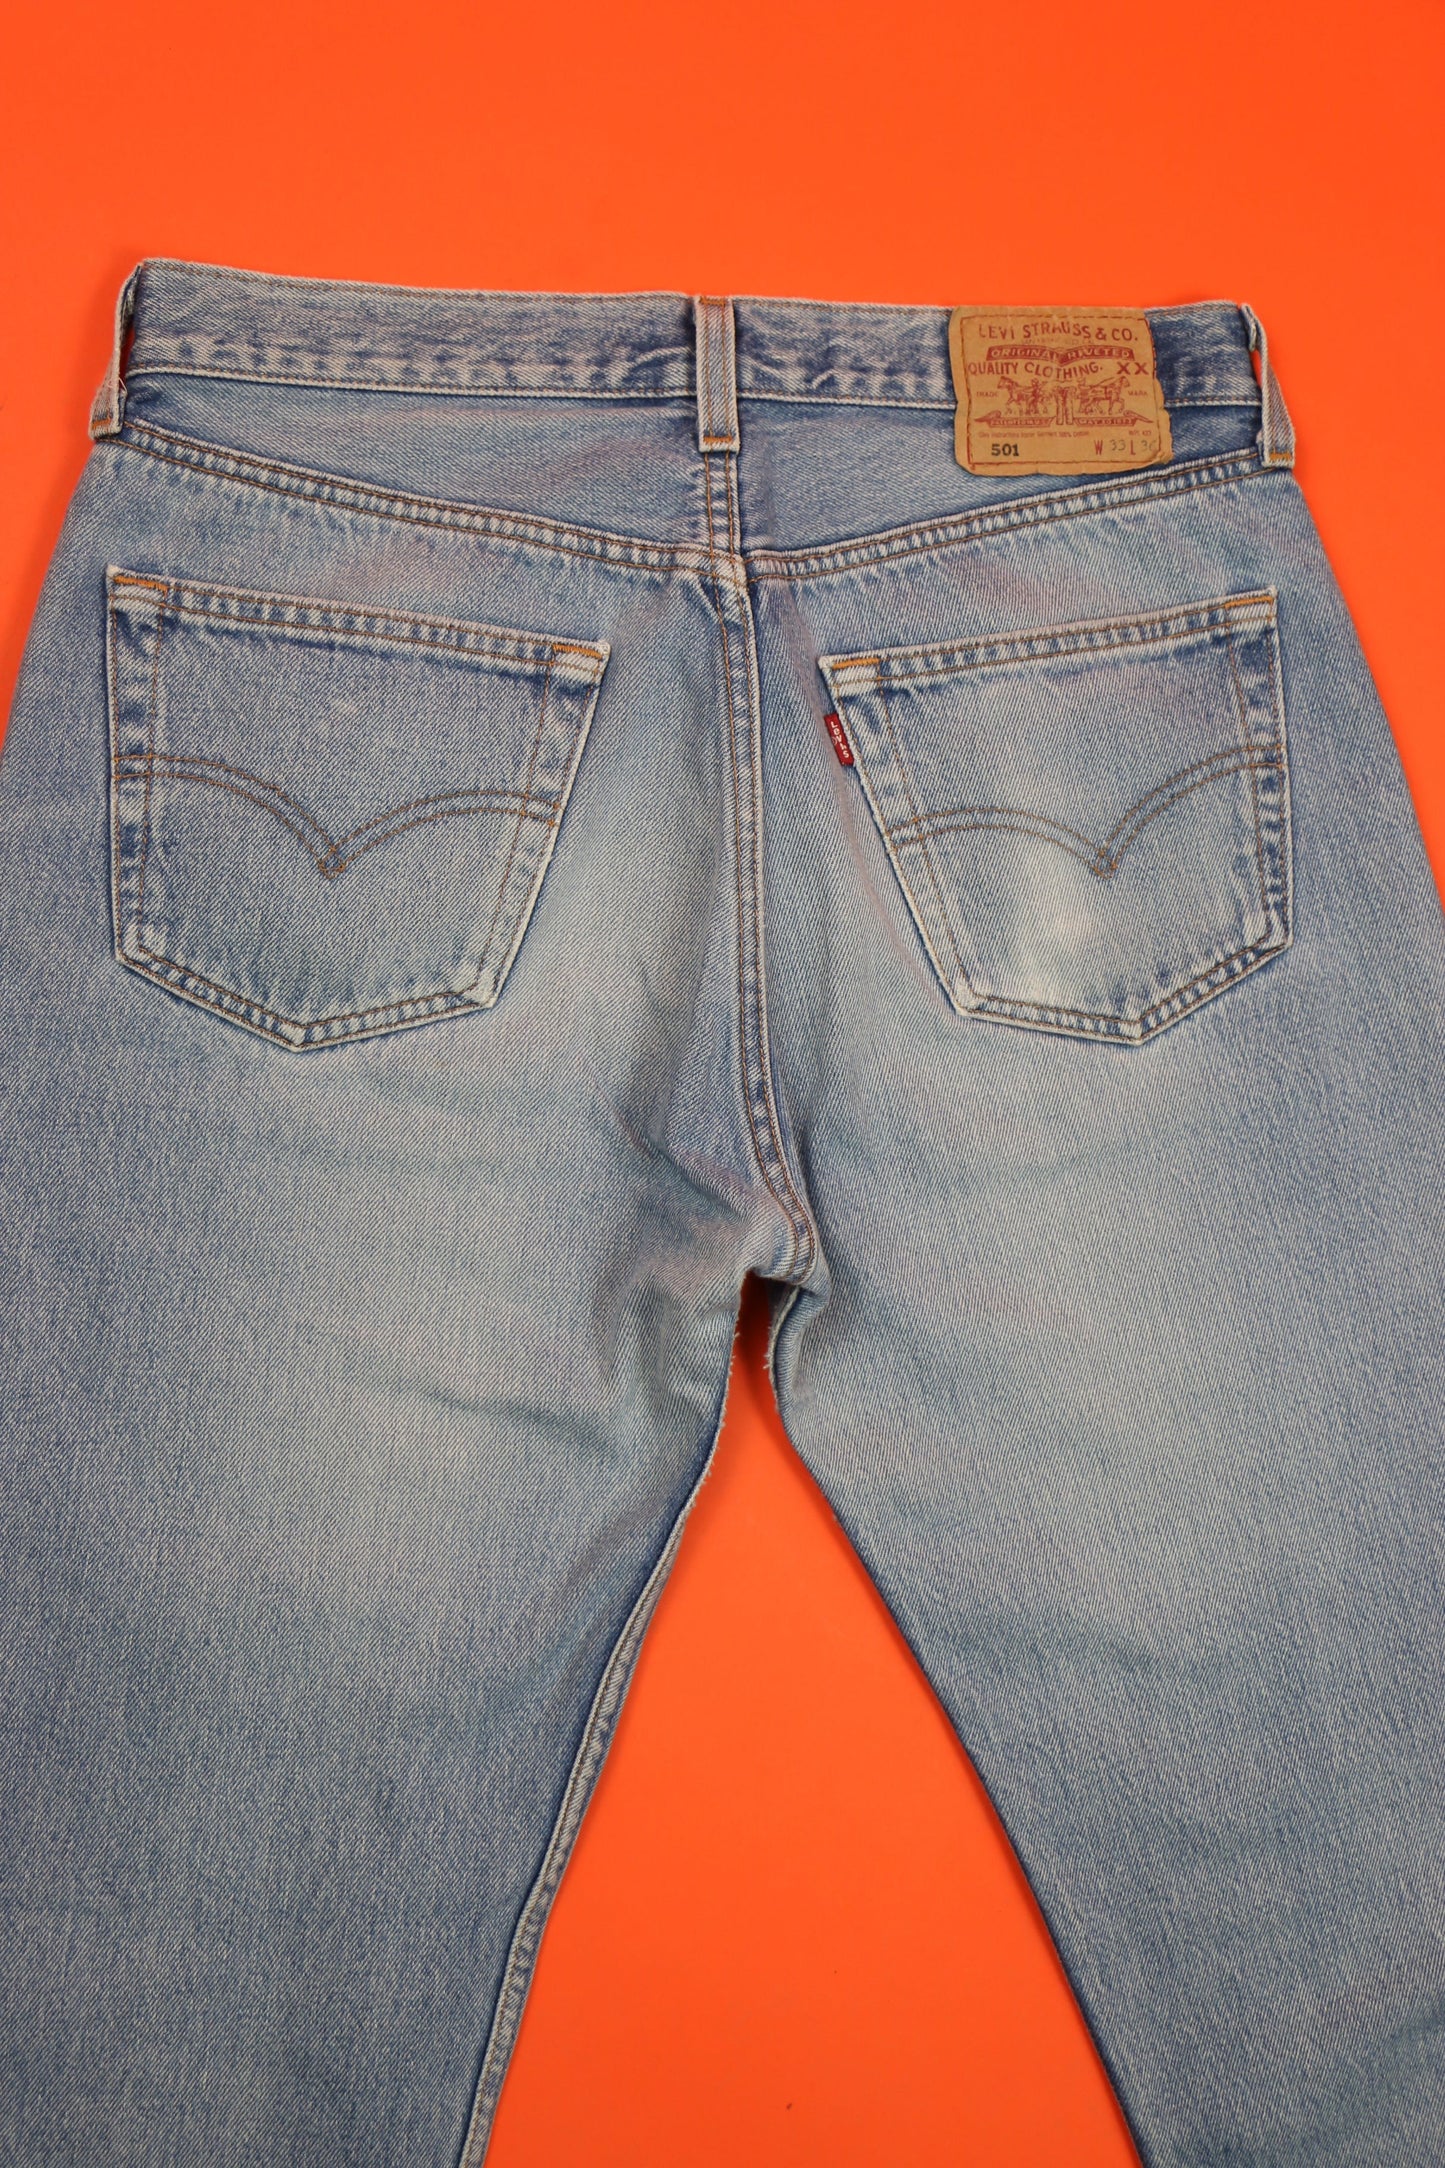 Levi's 501 Jeans Made in U.S.A. 'W33 L36' - vintage clothing clochard92.com